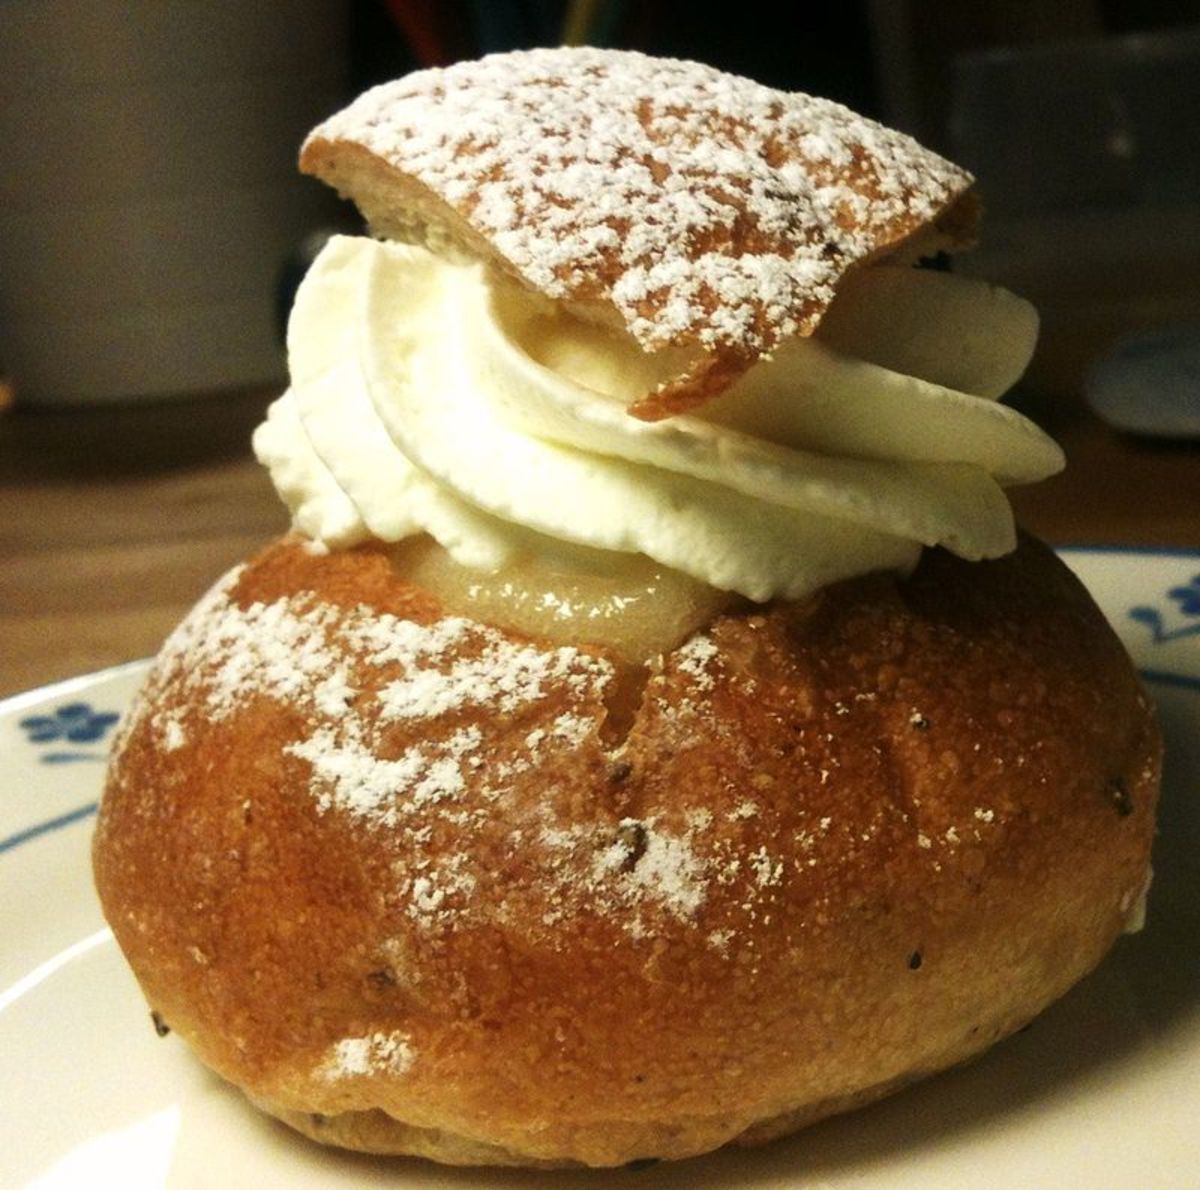 A delicious Semla cake. To learn more, and find out how to bake these, follow the link. Photo by Einarspetz on Wikimedia Commons.